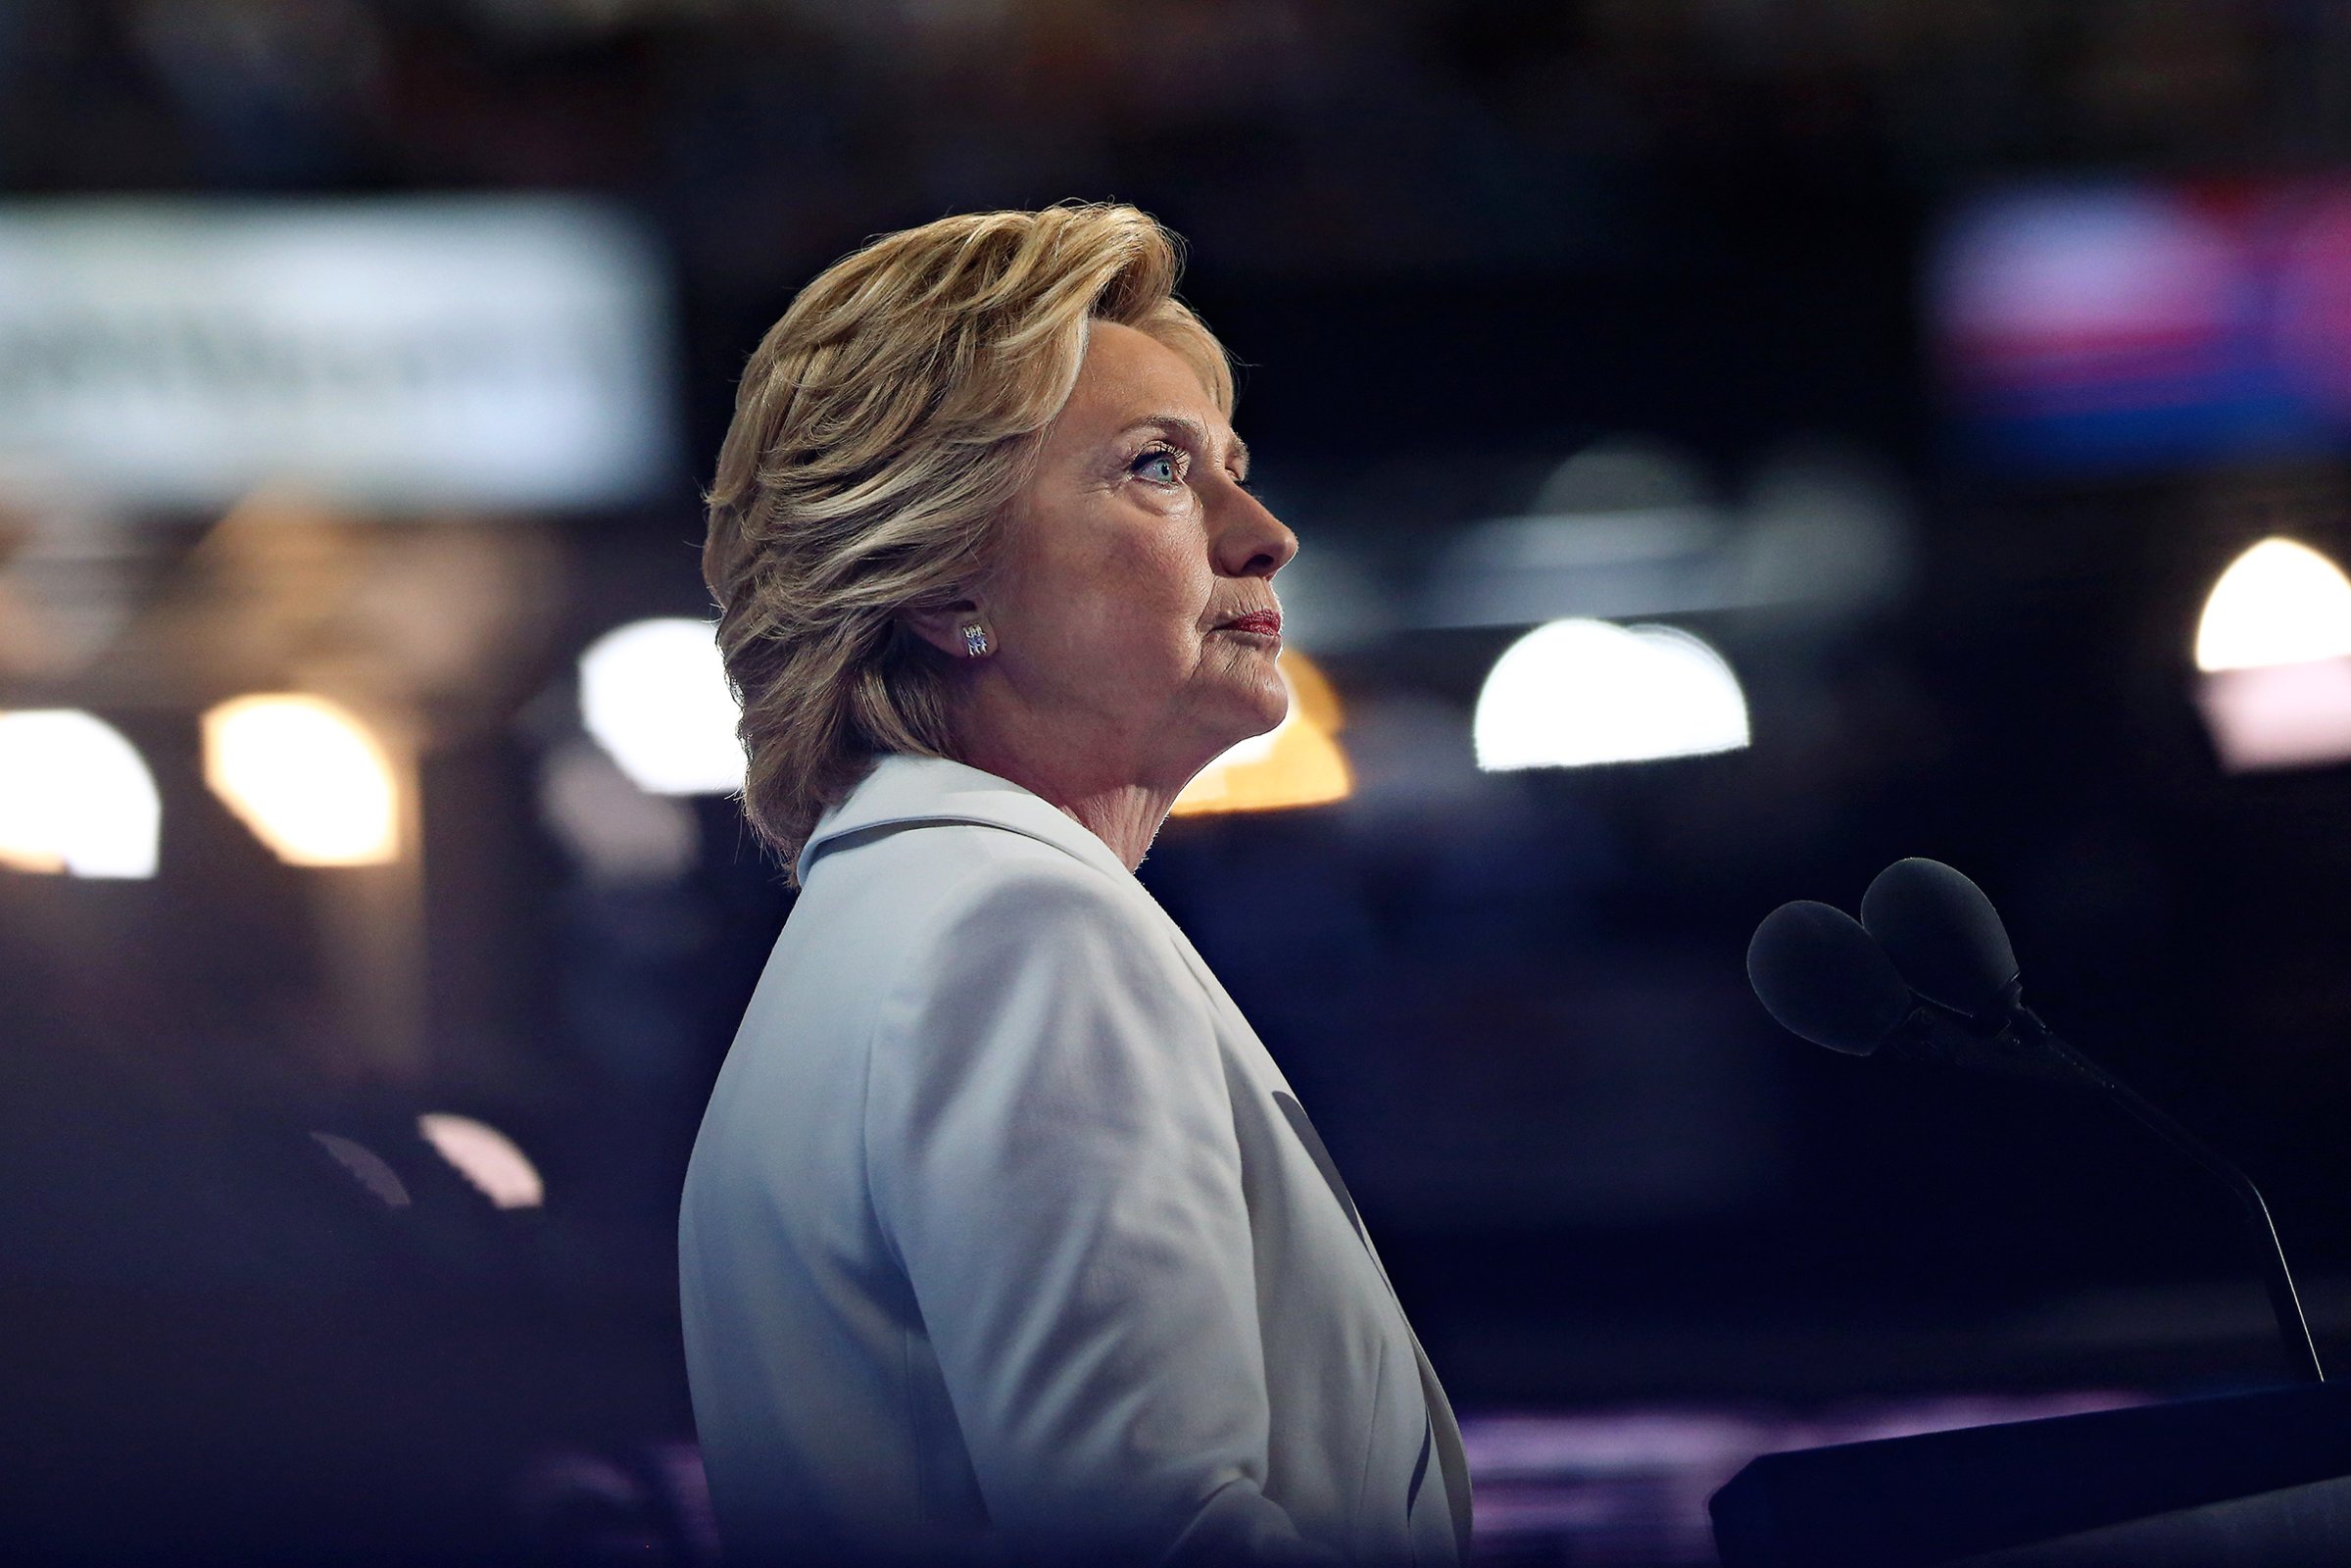 Clinton’s white pantsuit became a clarion call among women